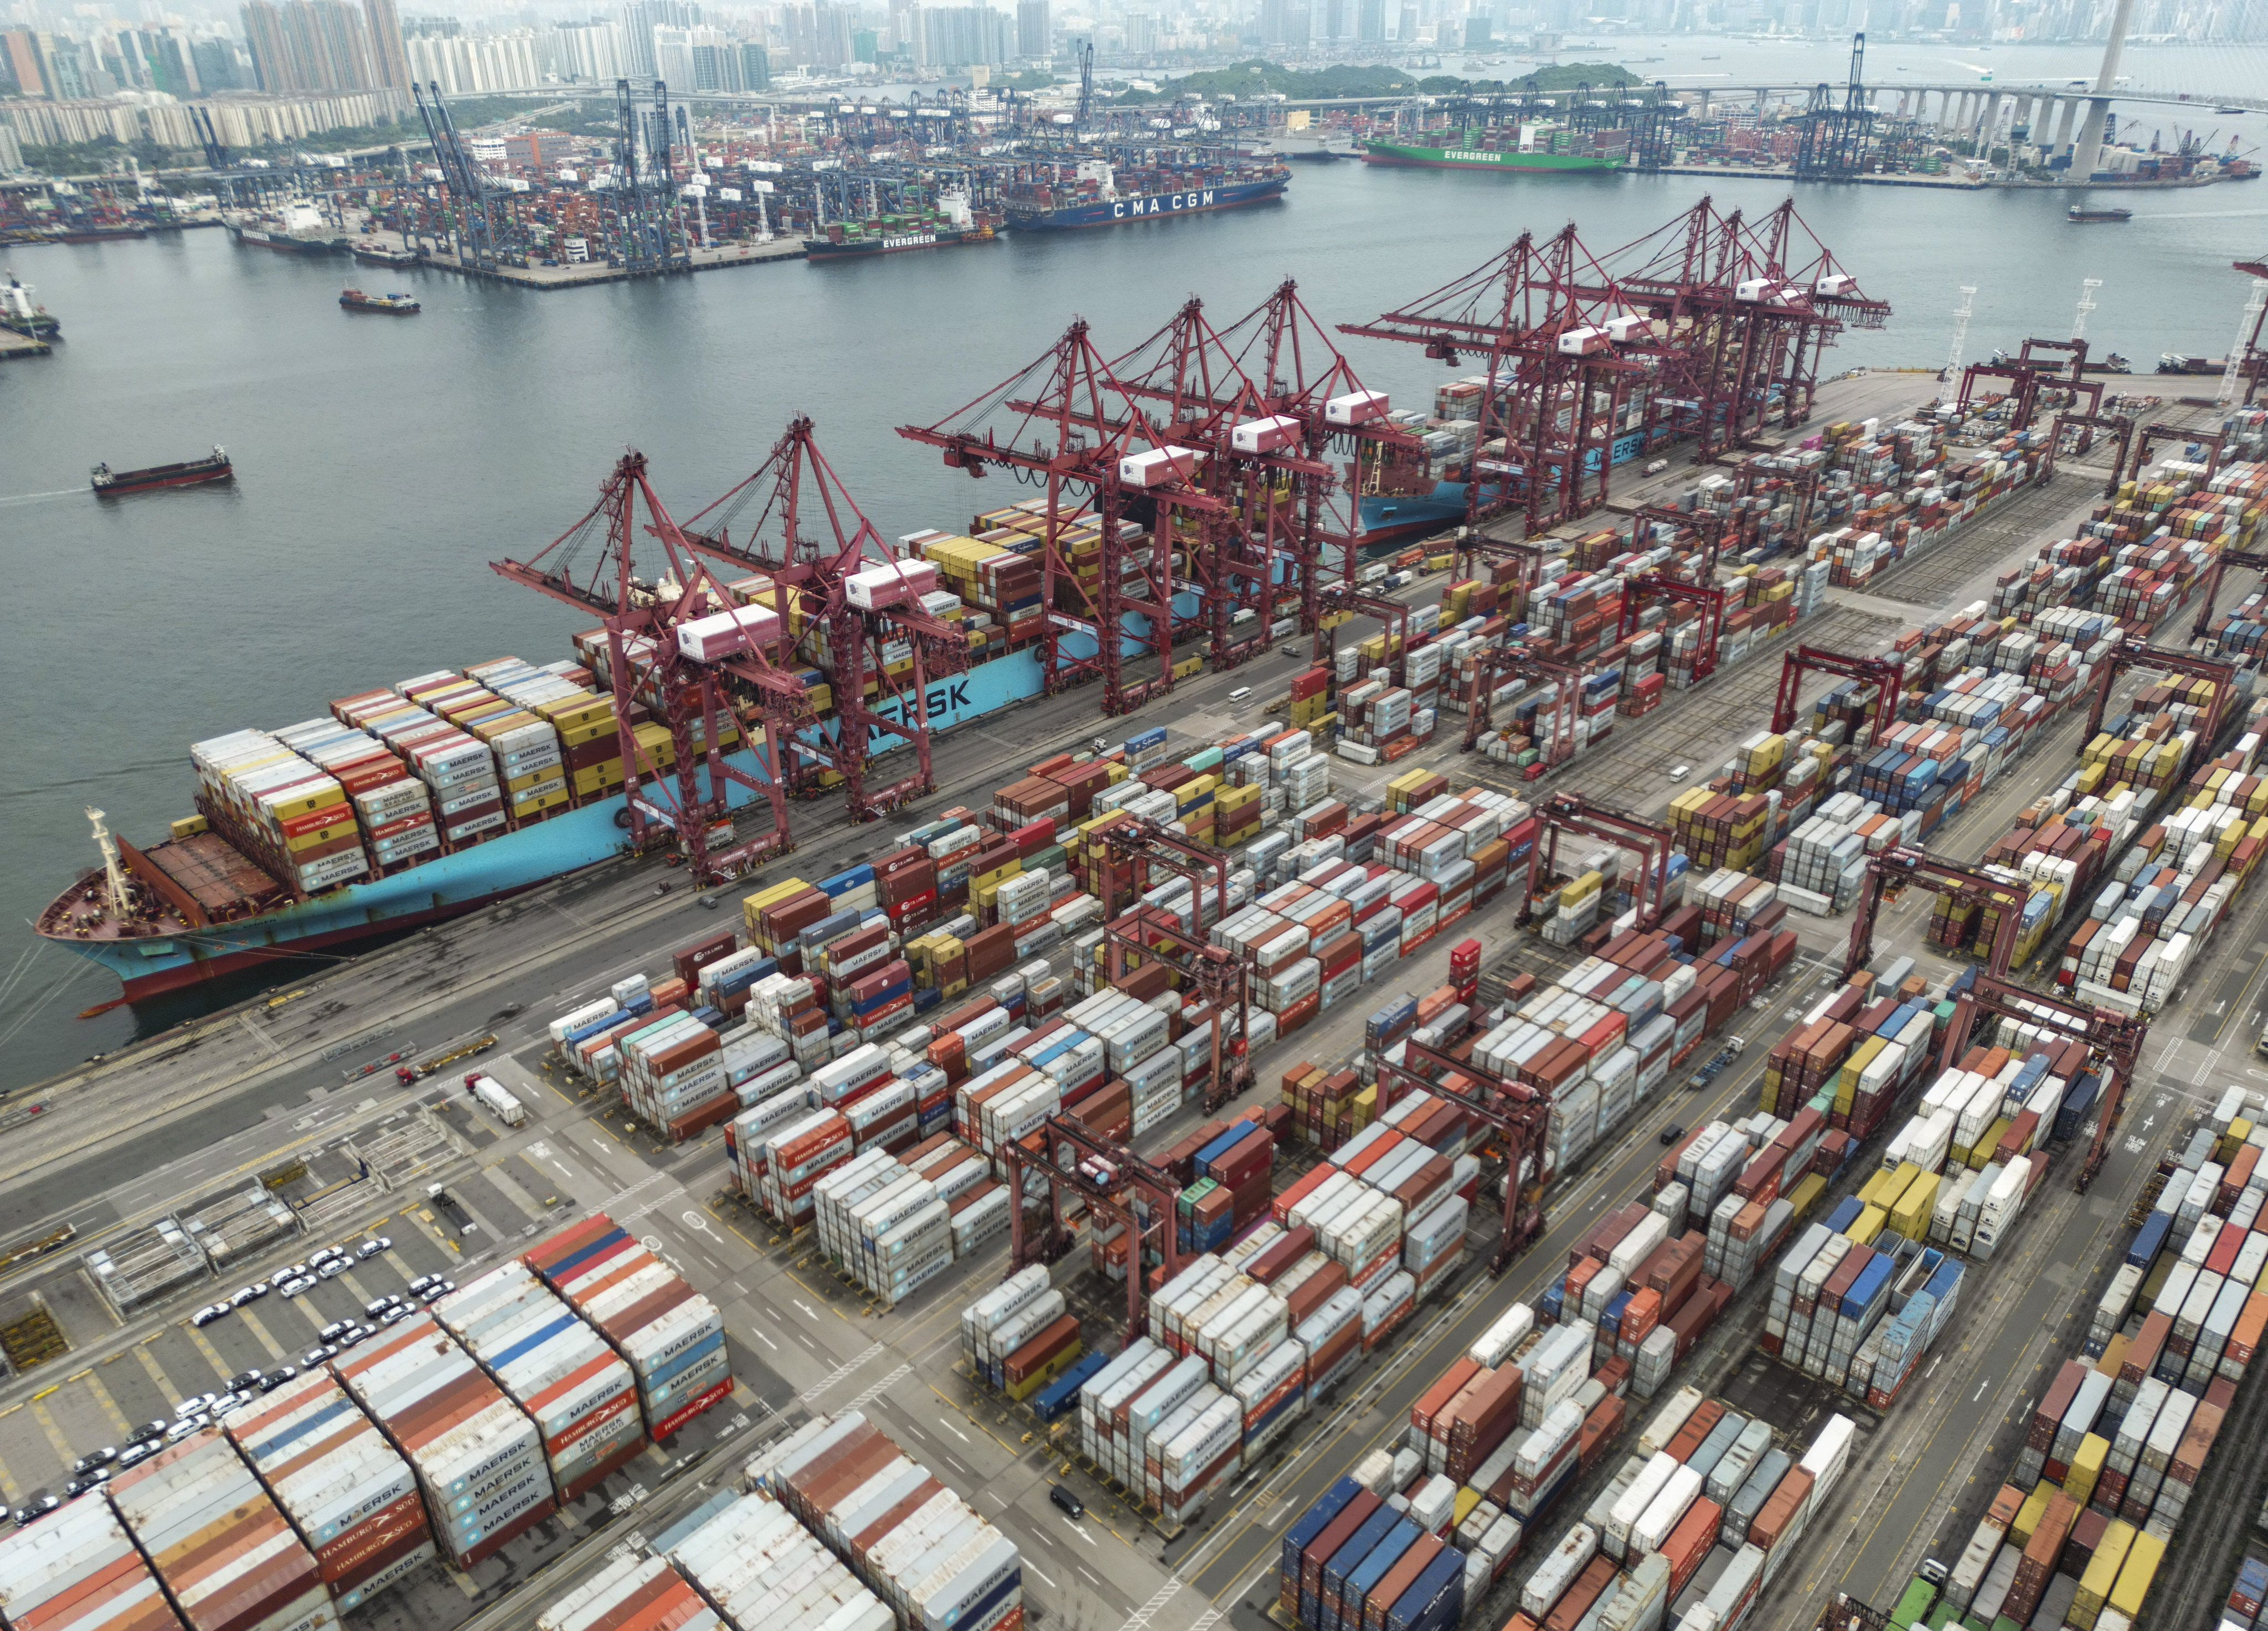 Hong Kong exports are likely to still face “significant challenges” next year, the city’s finance chief has said. Photo: Dickson Lee